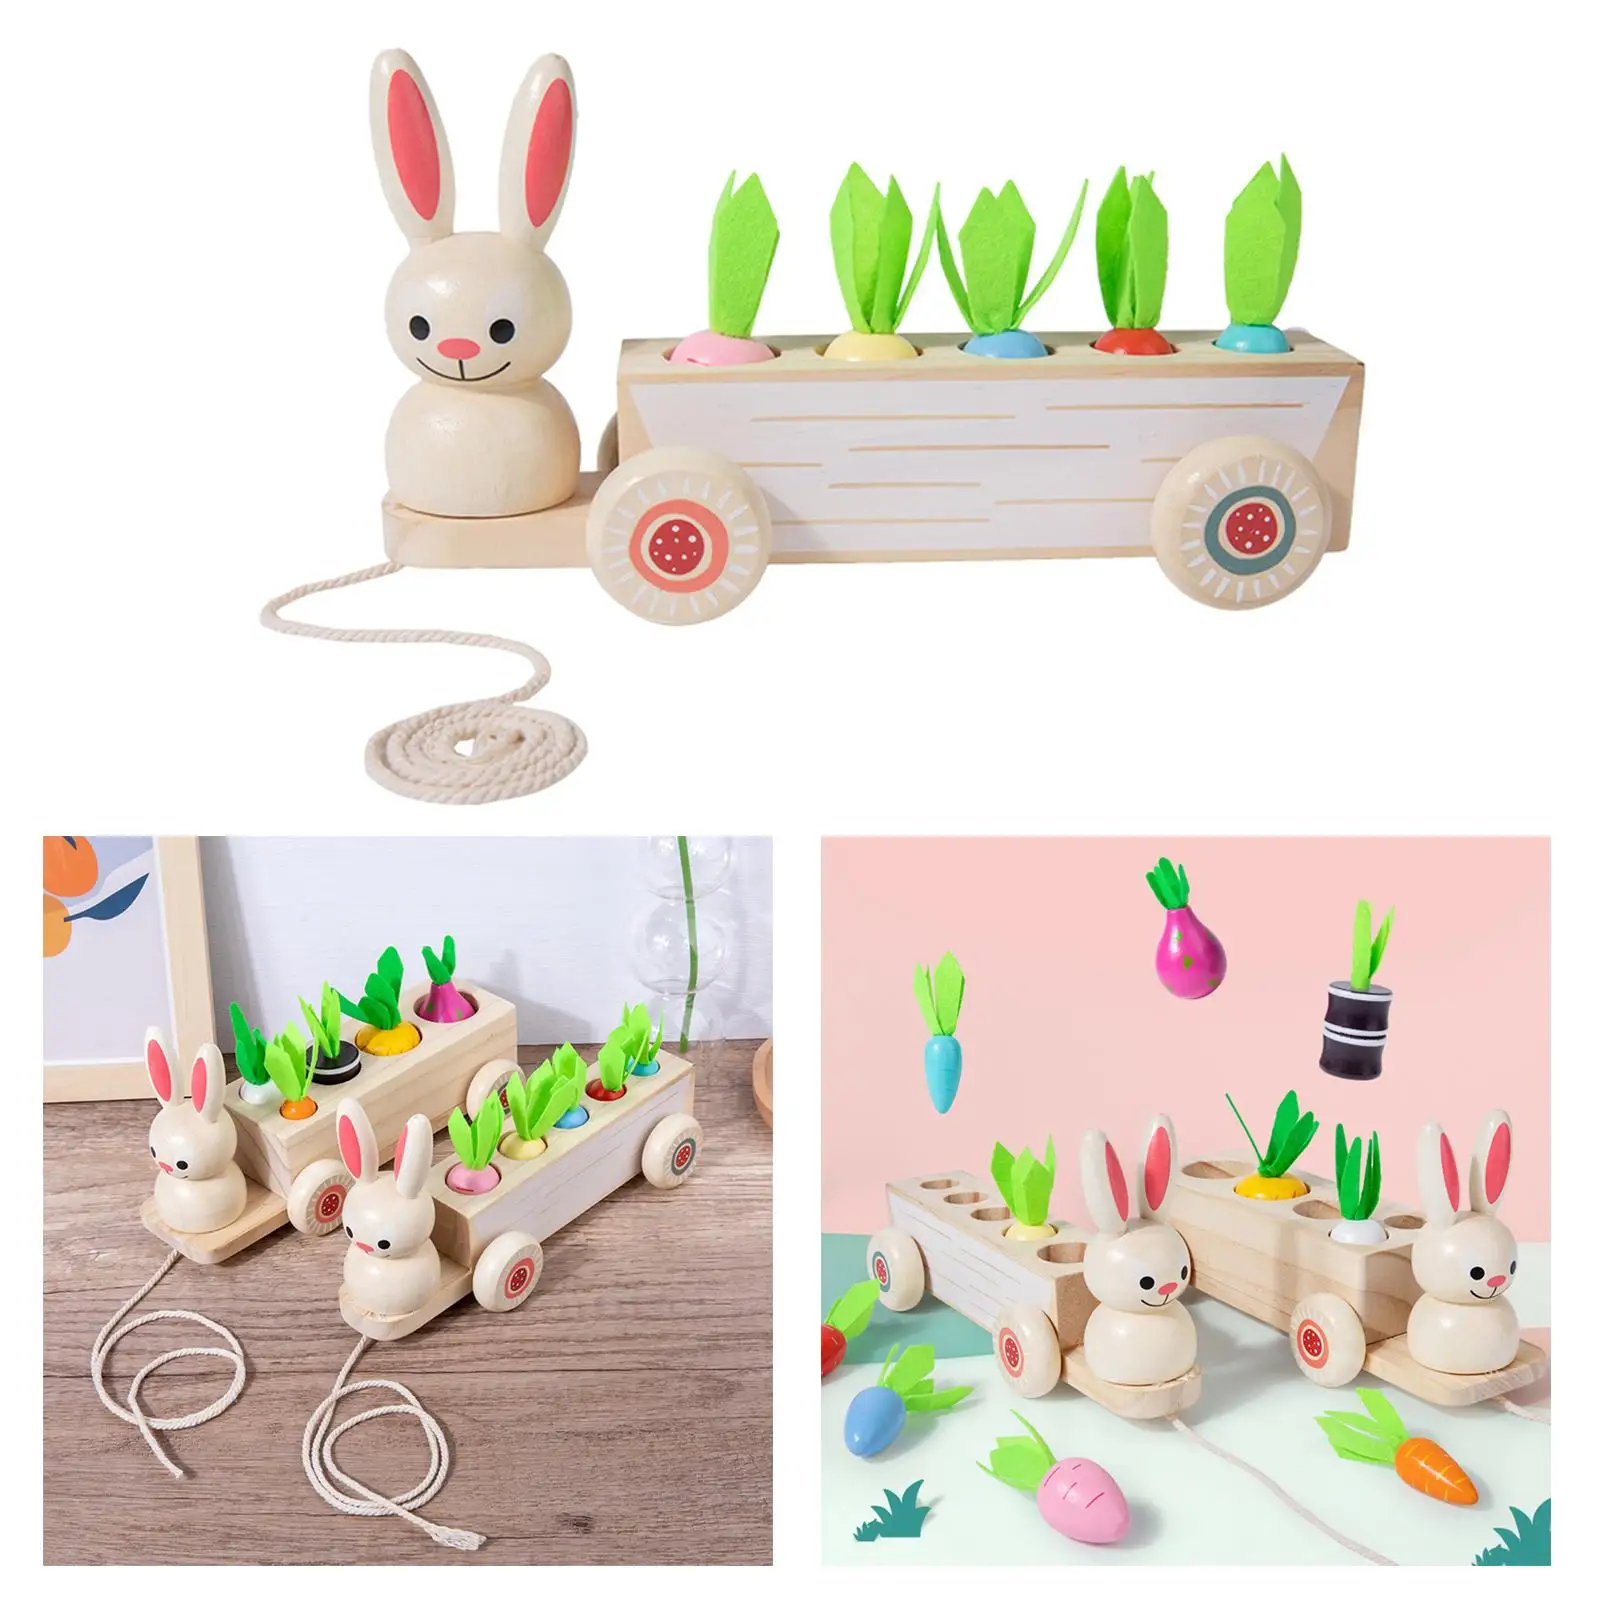 Baby Montessori Toys Wooden Block Happy Farm Pulling Carrot Shape Matching Size Cognition Montessori Educational Toy Gift Kids